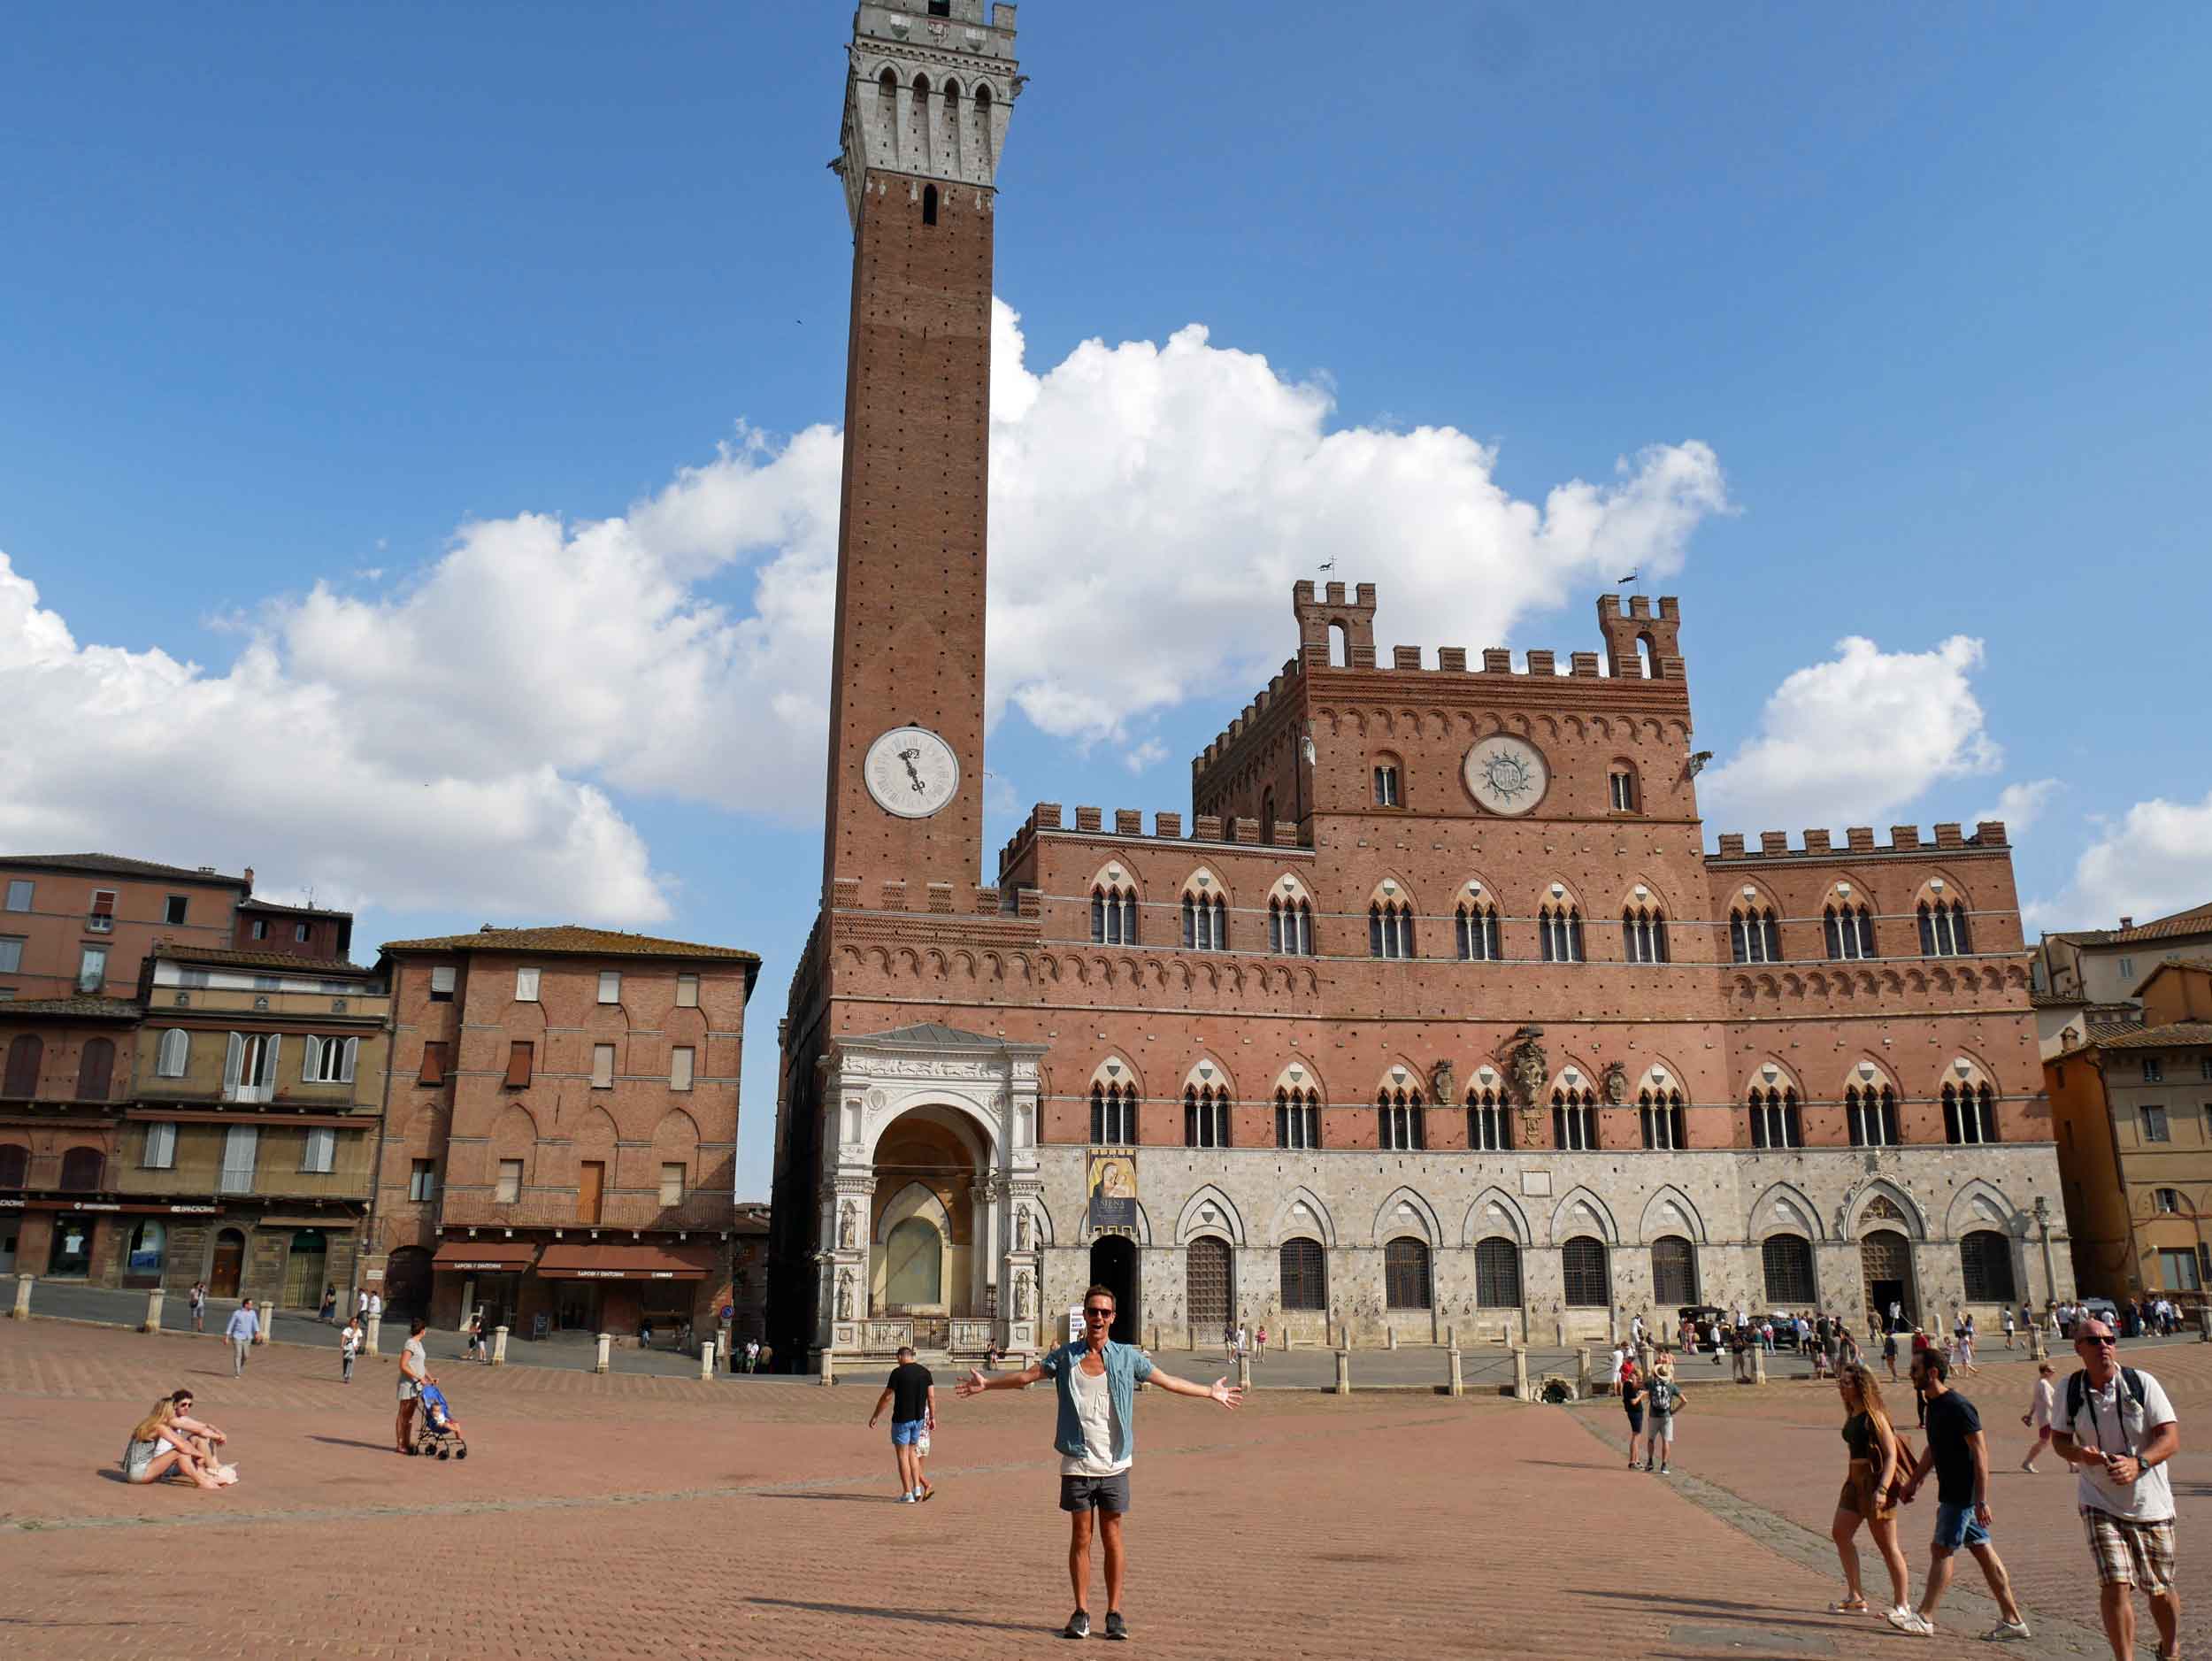  Siena's broadly sloping Piazza del Campo with its sky-high tower is the perfect place to gather and meet friends.&nbsp; 